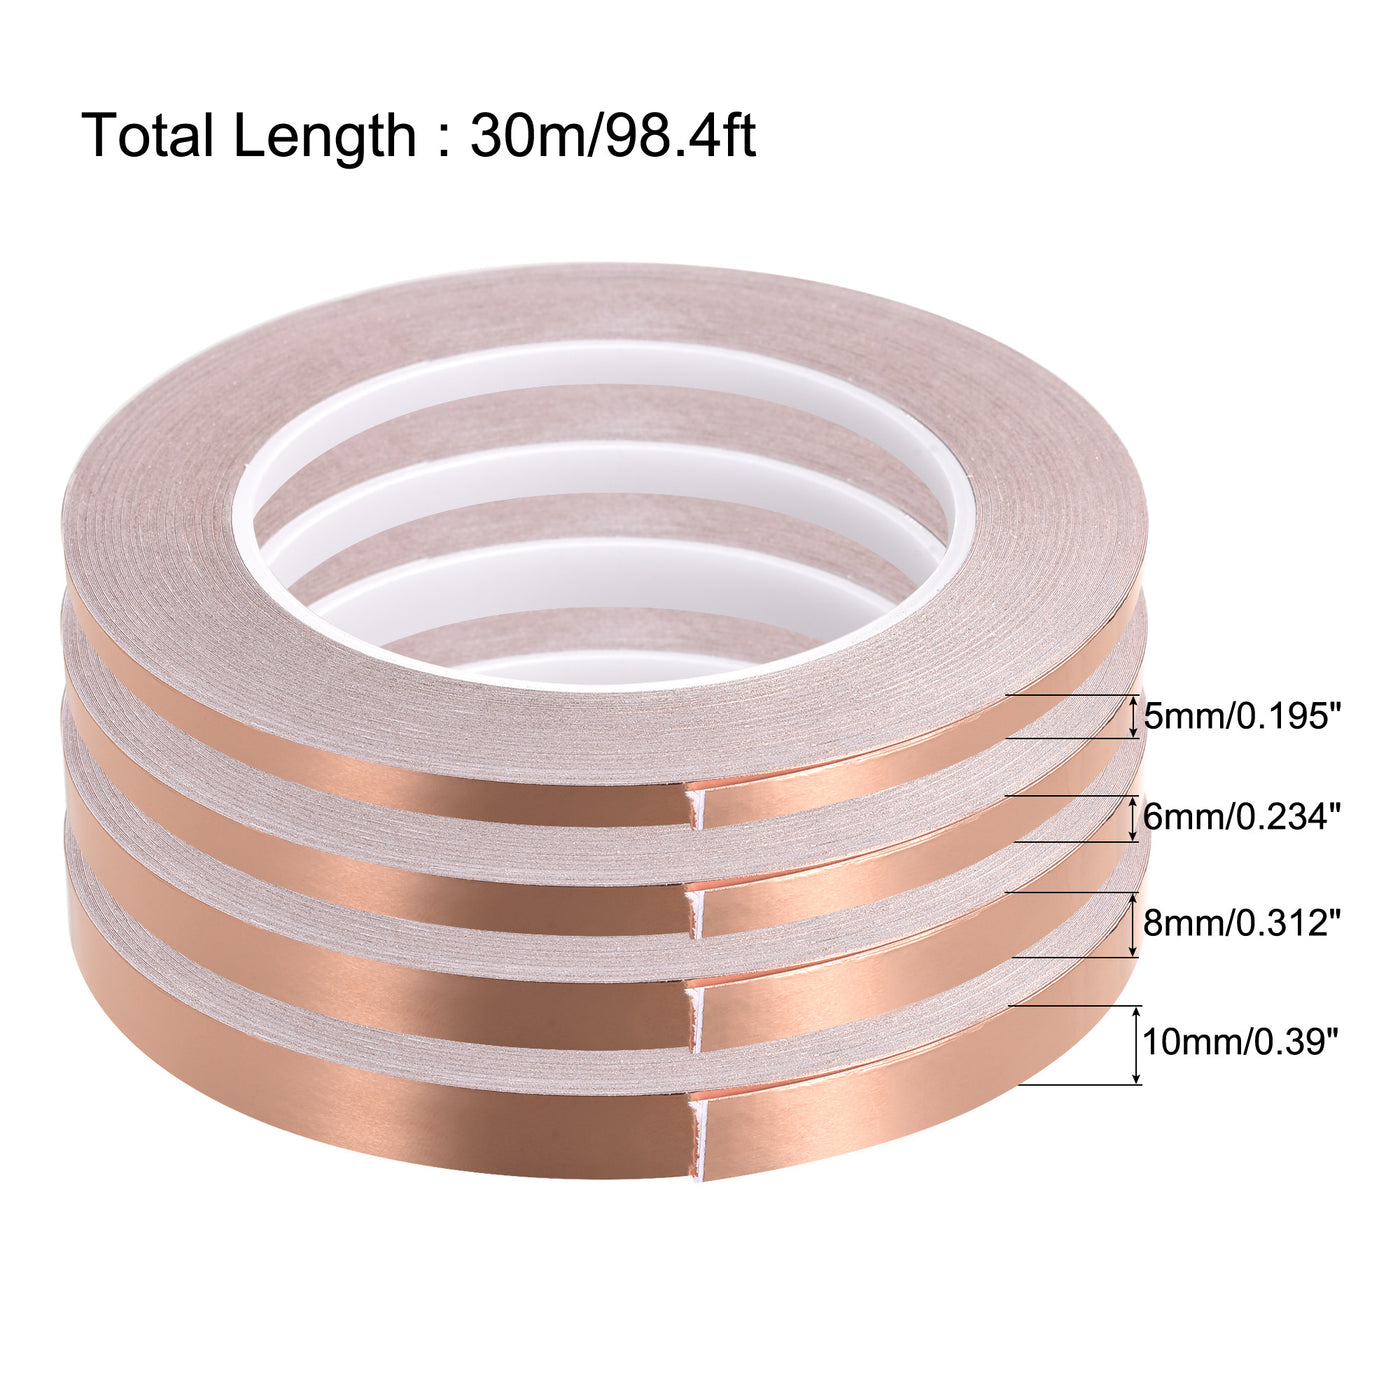 uxcell Uxcell Single-Sided Conductive Tape Copper Foil Tape 5mm/6mm/8mm/10mm x 30m/98.4ft 4pcs